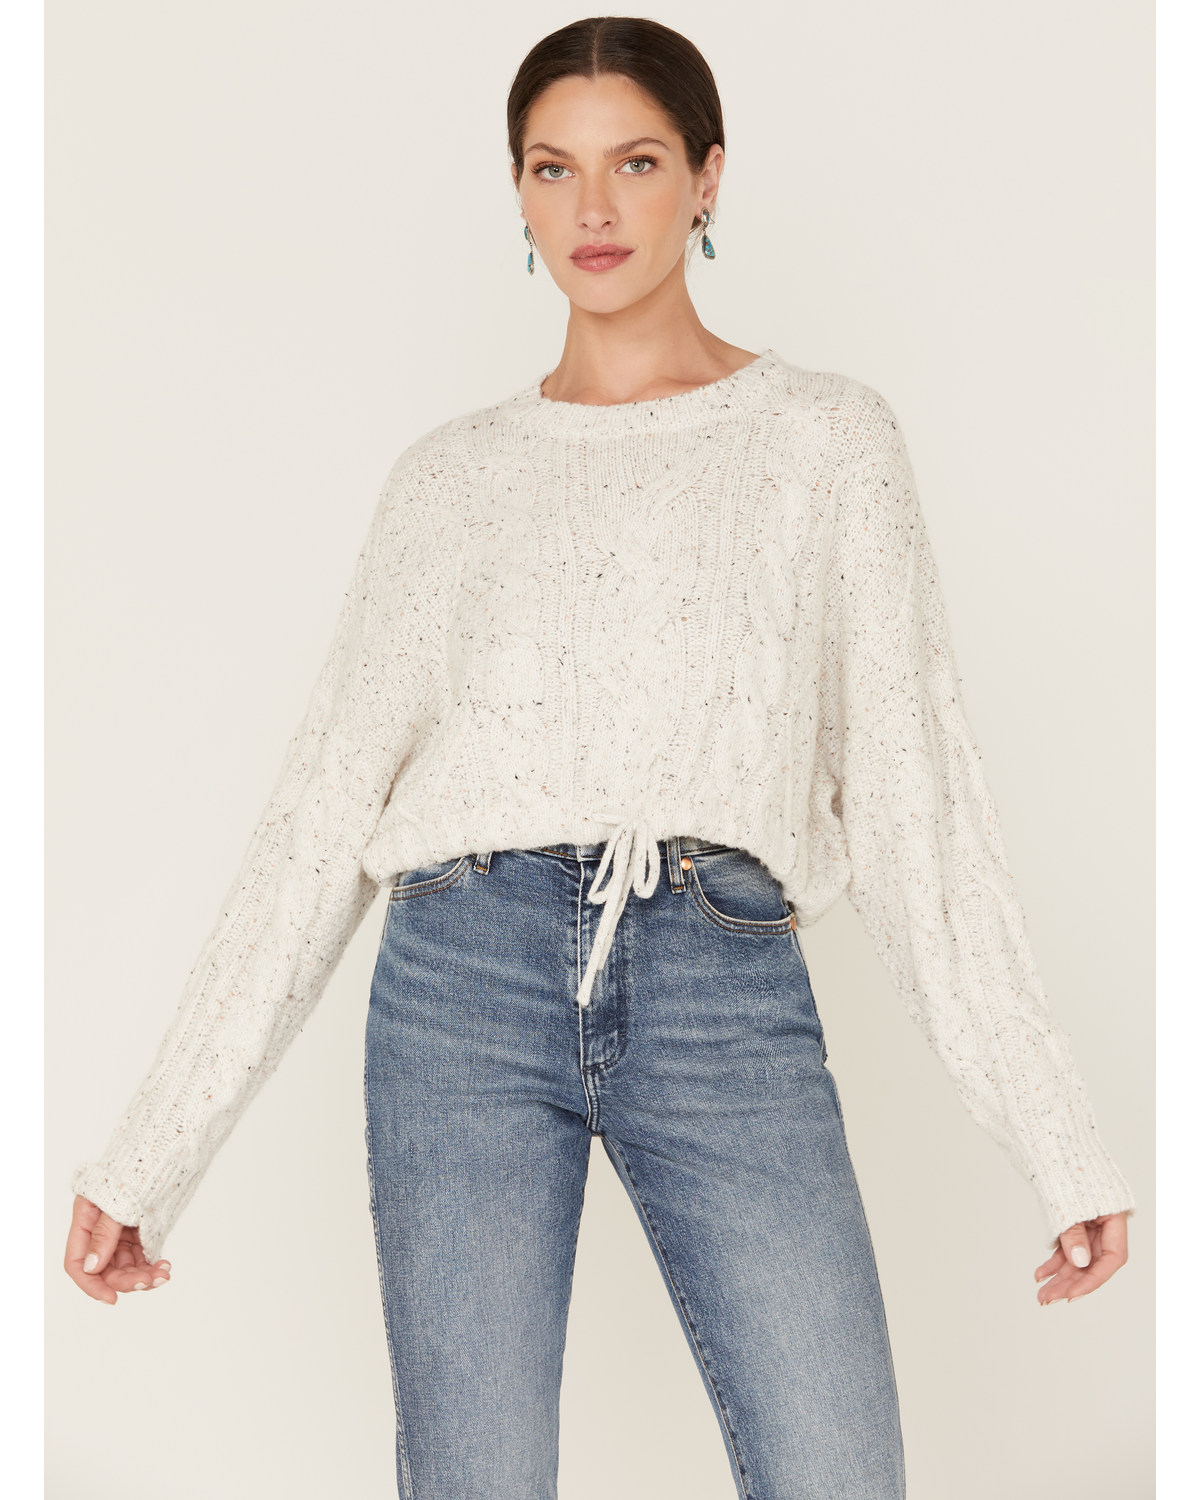 Wild Moss Women's Speckled Cable Knit Cropped Sweater